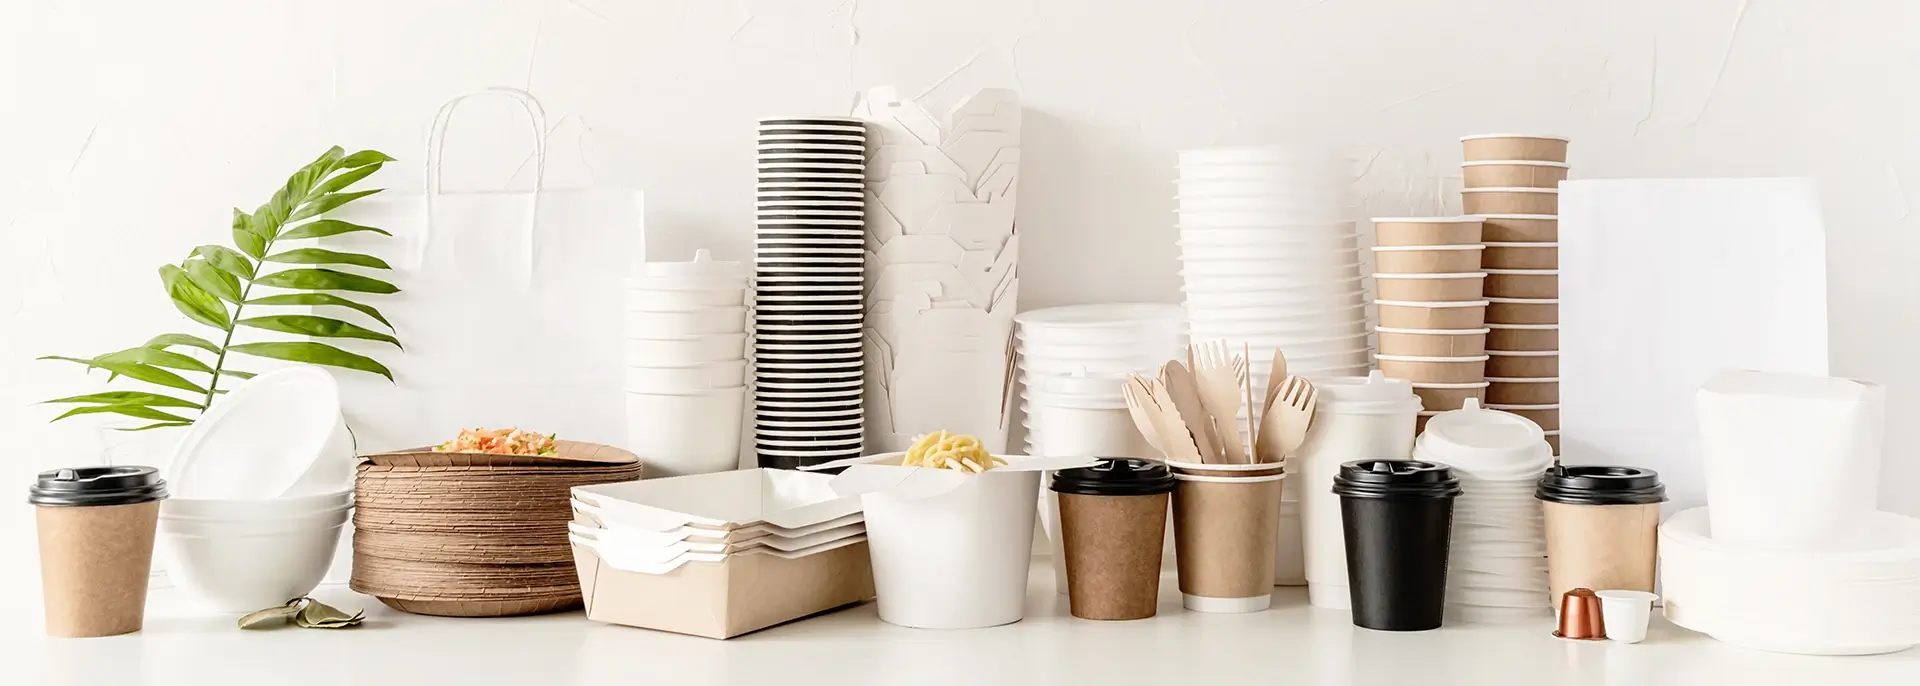 Assortment of stacked disposable coffee cups, coffee lids, oyster pails, and utensils